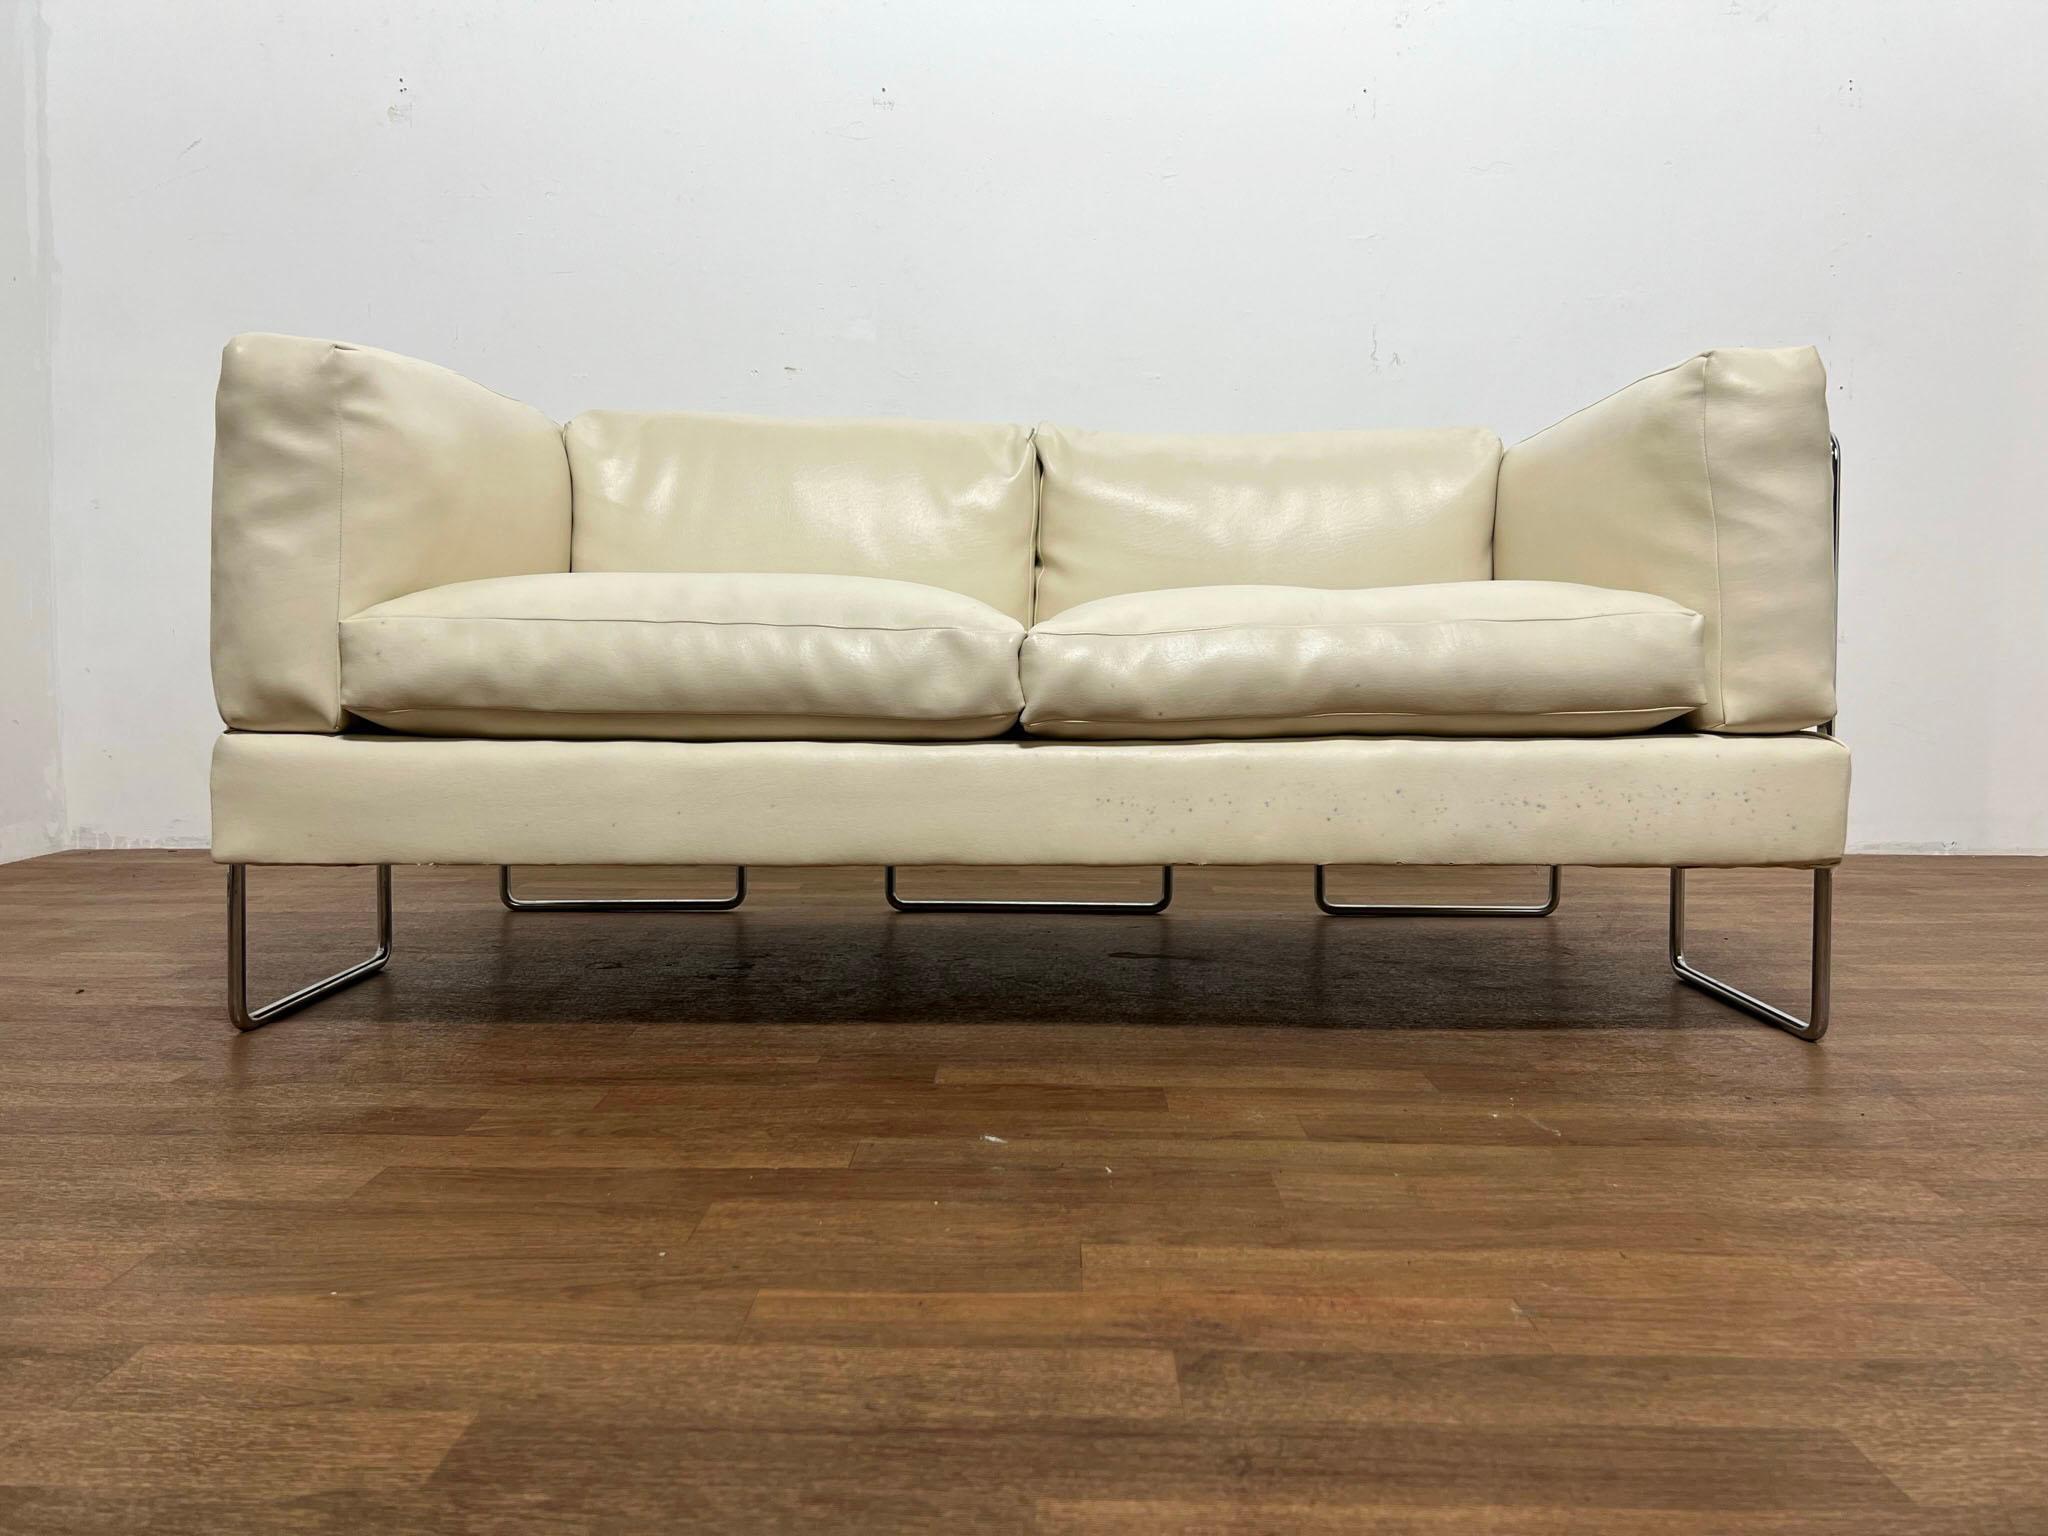 Mid-20th Century Kwok Hoi Chan Loveseat Sofa for Steiner, France, Circa 1960s